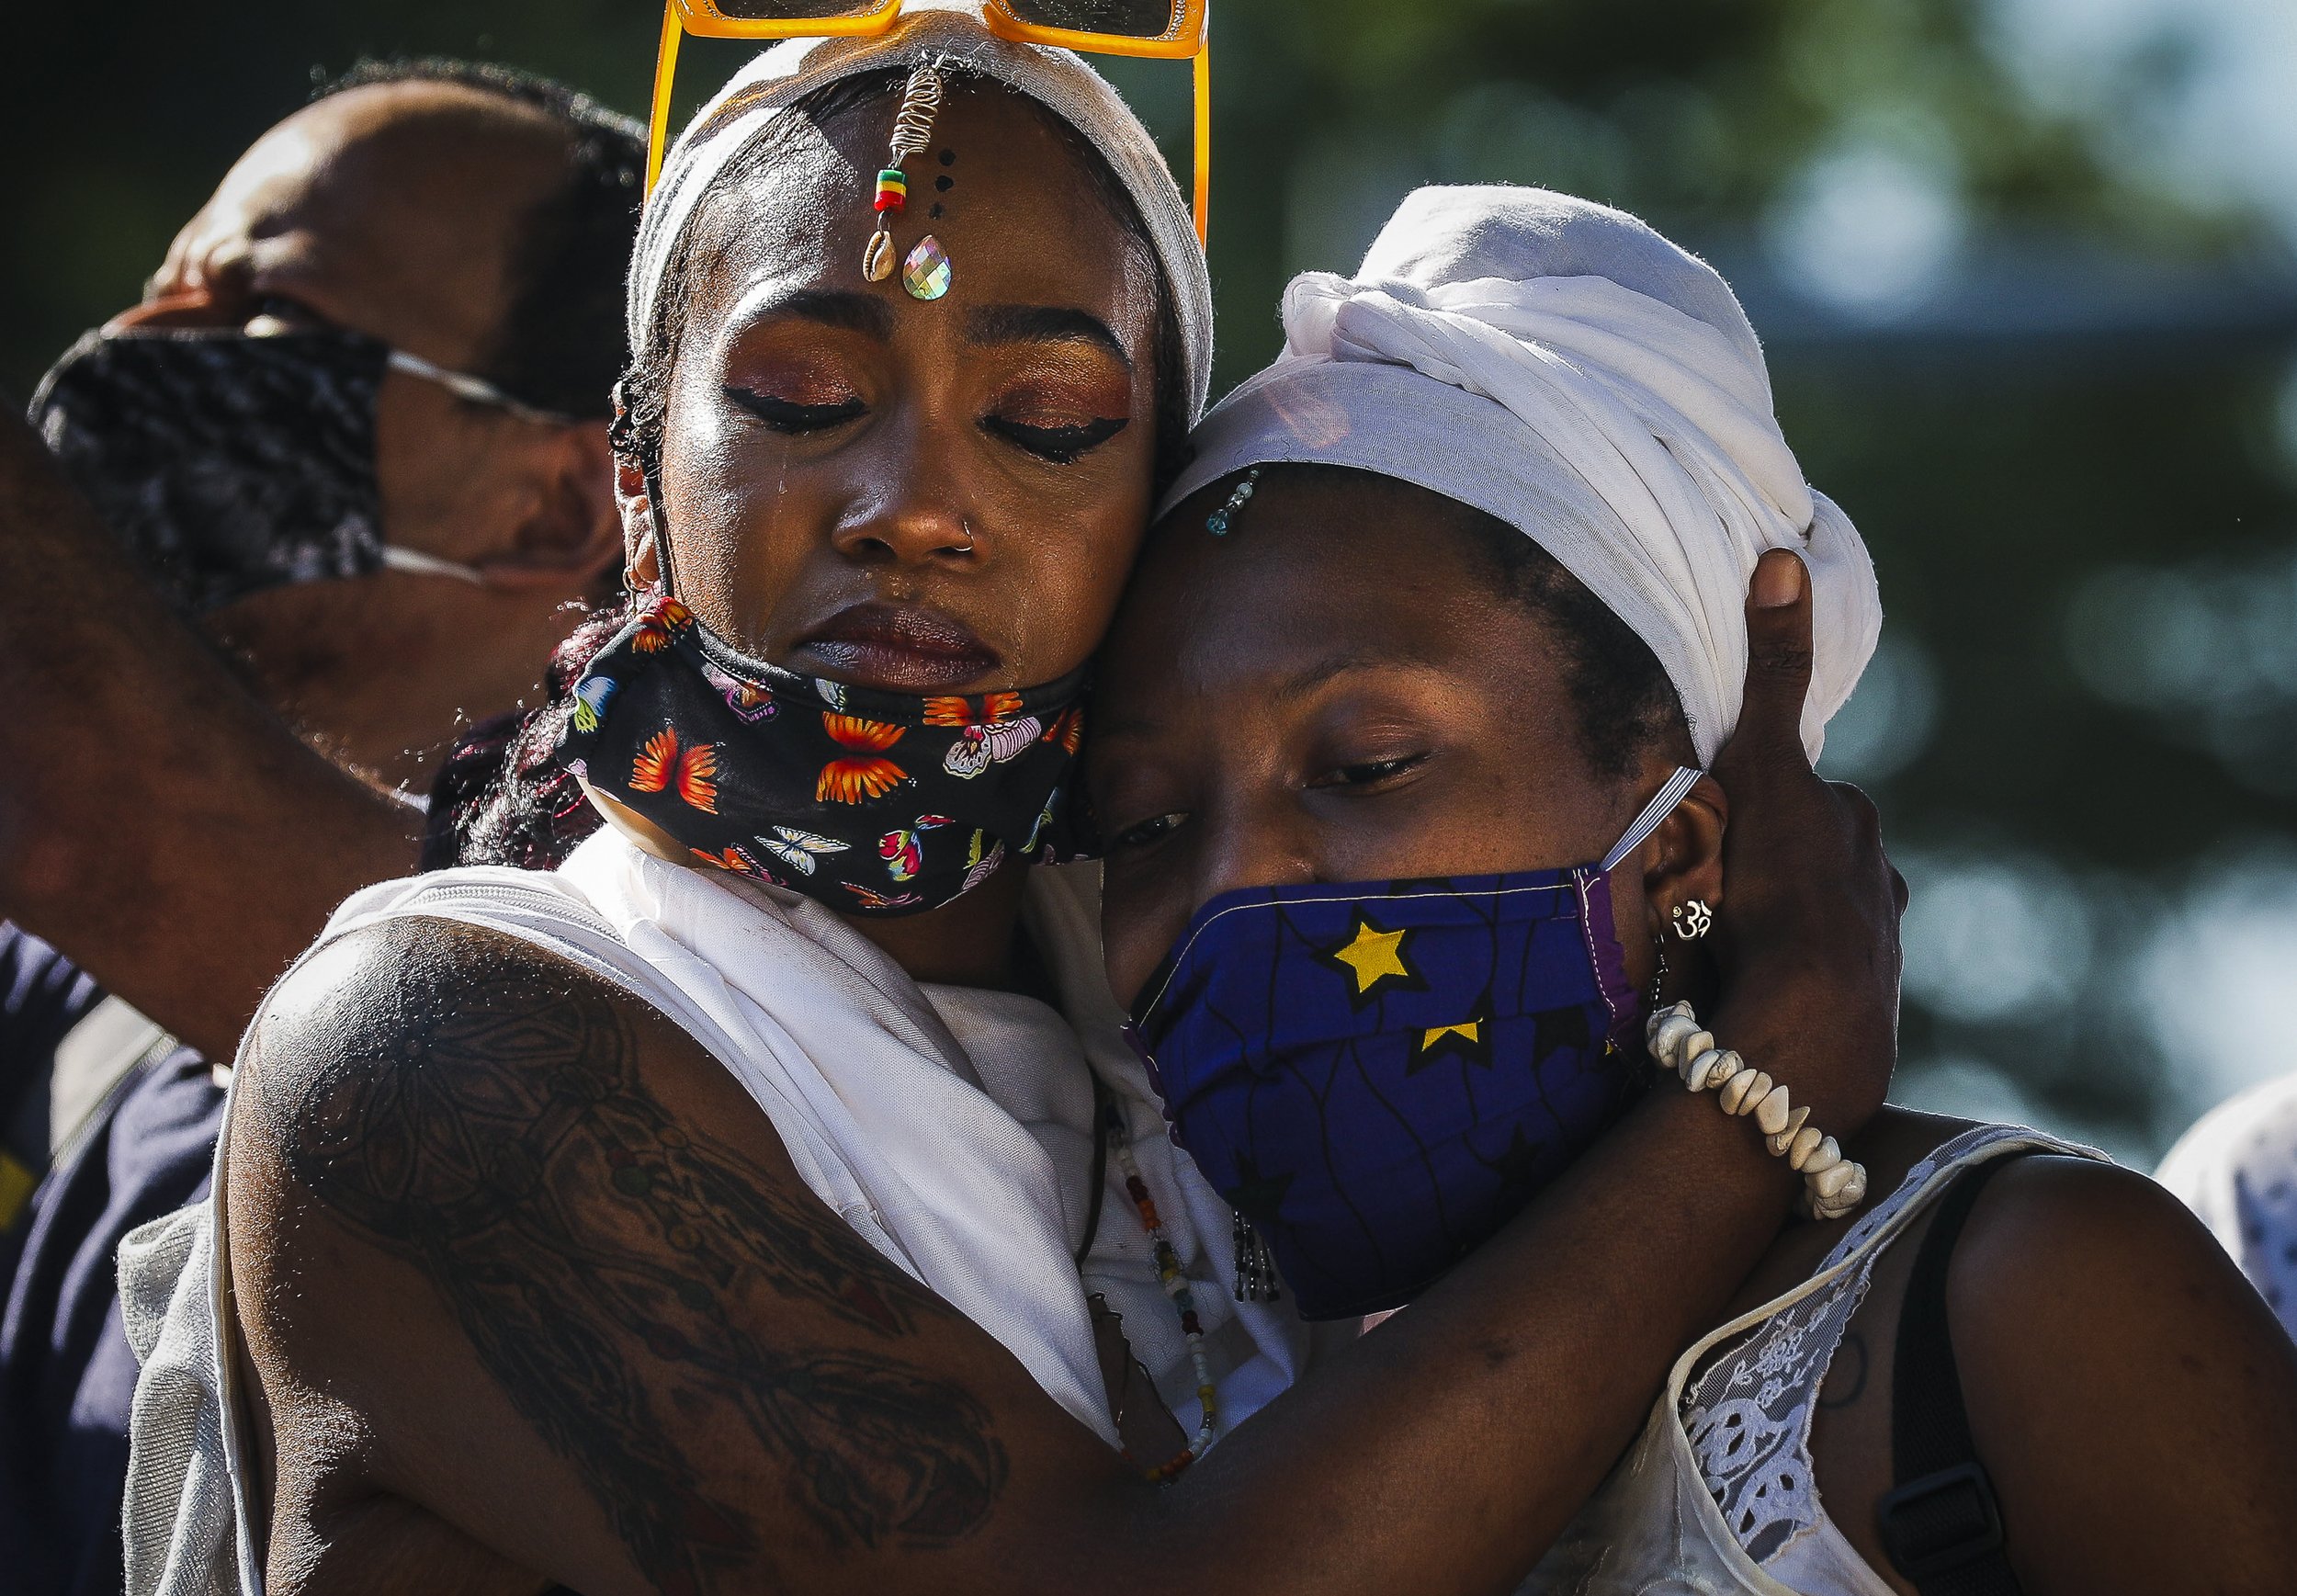   Danielle Ruffen, left, embraces her friend as they hold sacred space for the Black women who have been slain by law enforcement.   More than 1,000 people gather Saturday afternoon to celebrate the lives of Black women and demand an end to police vi